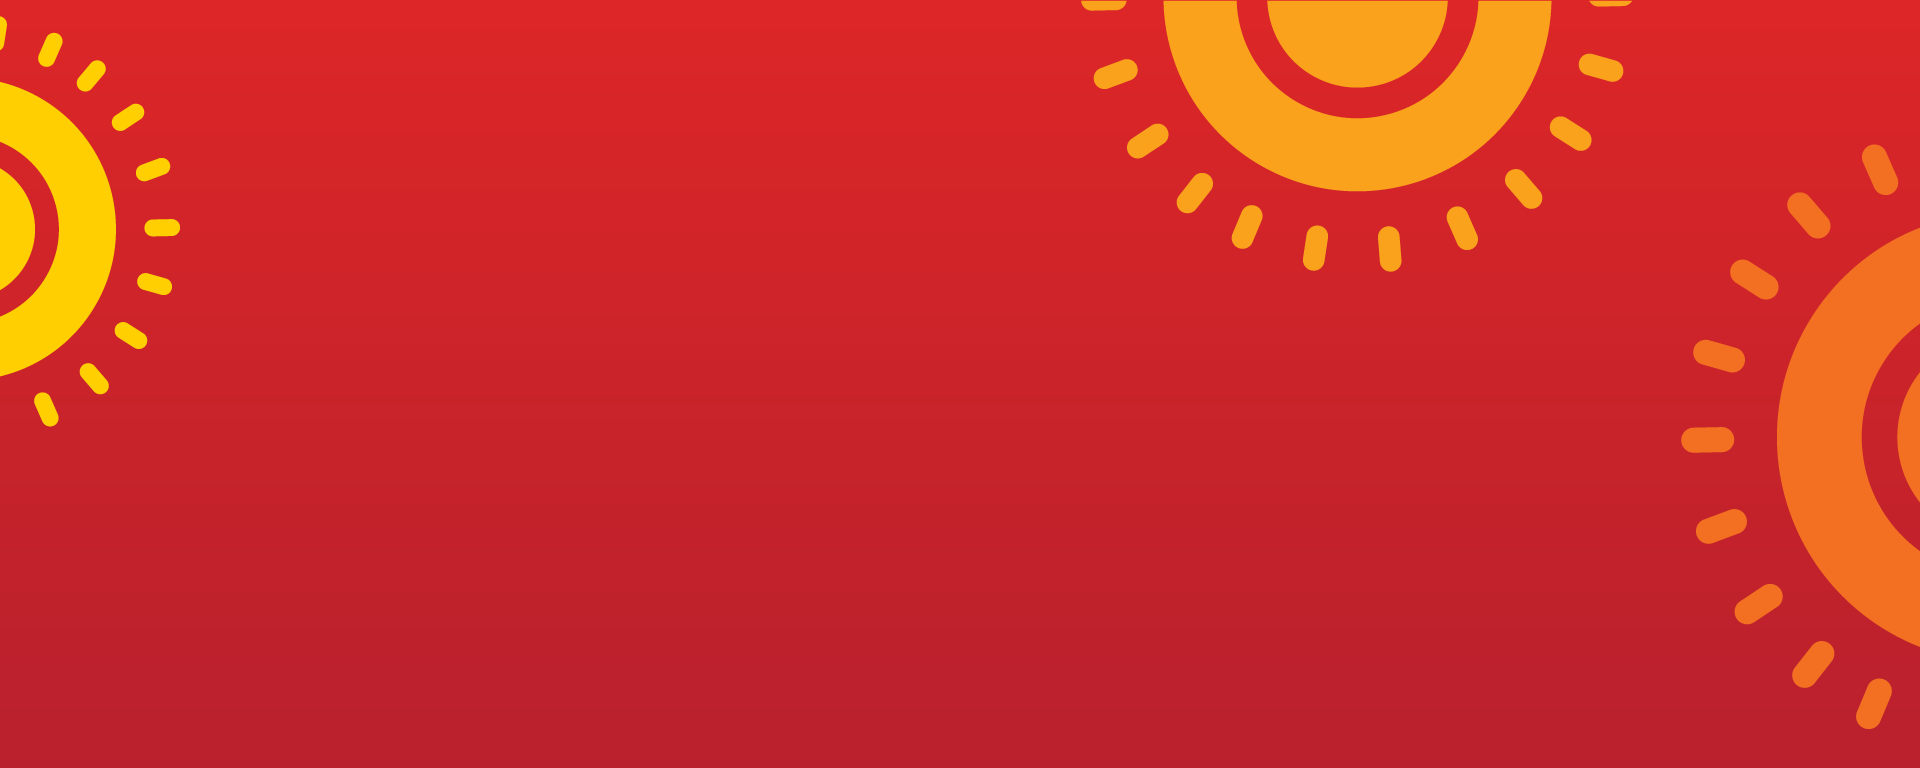 Graphic of red background with gold and orange suns